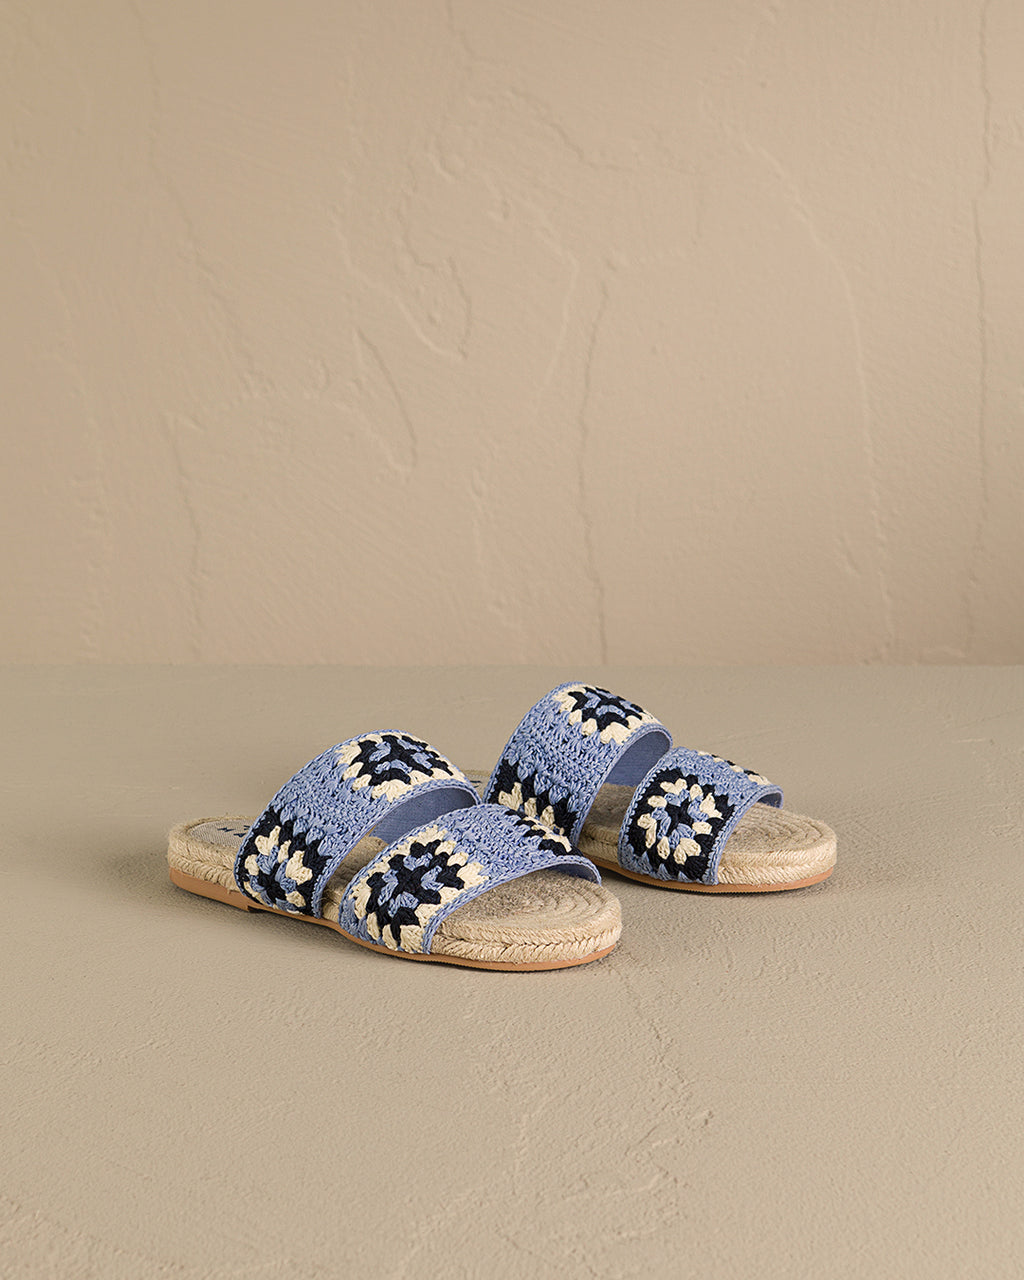 Cotton Crochet Two Bands|Jute Sandals - Indigo And Navy Blue